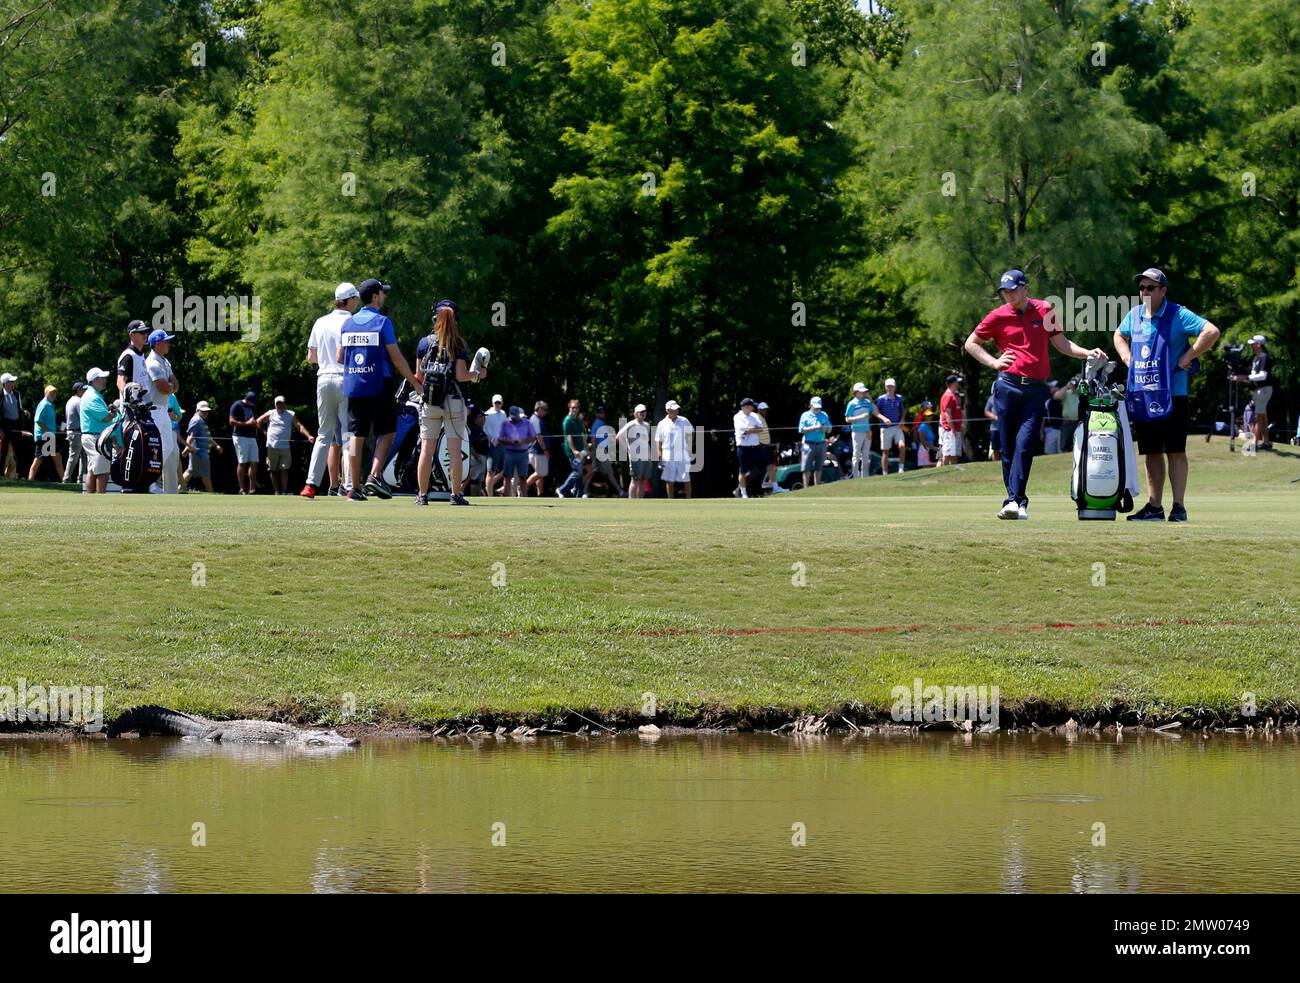 Golfer Daniel Berger, second right, and his caddie watch an alligator as Berger waits his turn on the fifth fairway during the first round of the PGA Zurich Classic golf tournament at